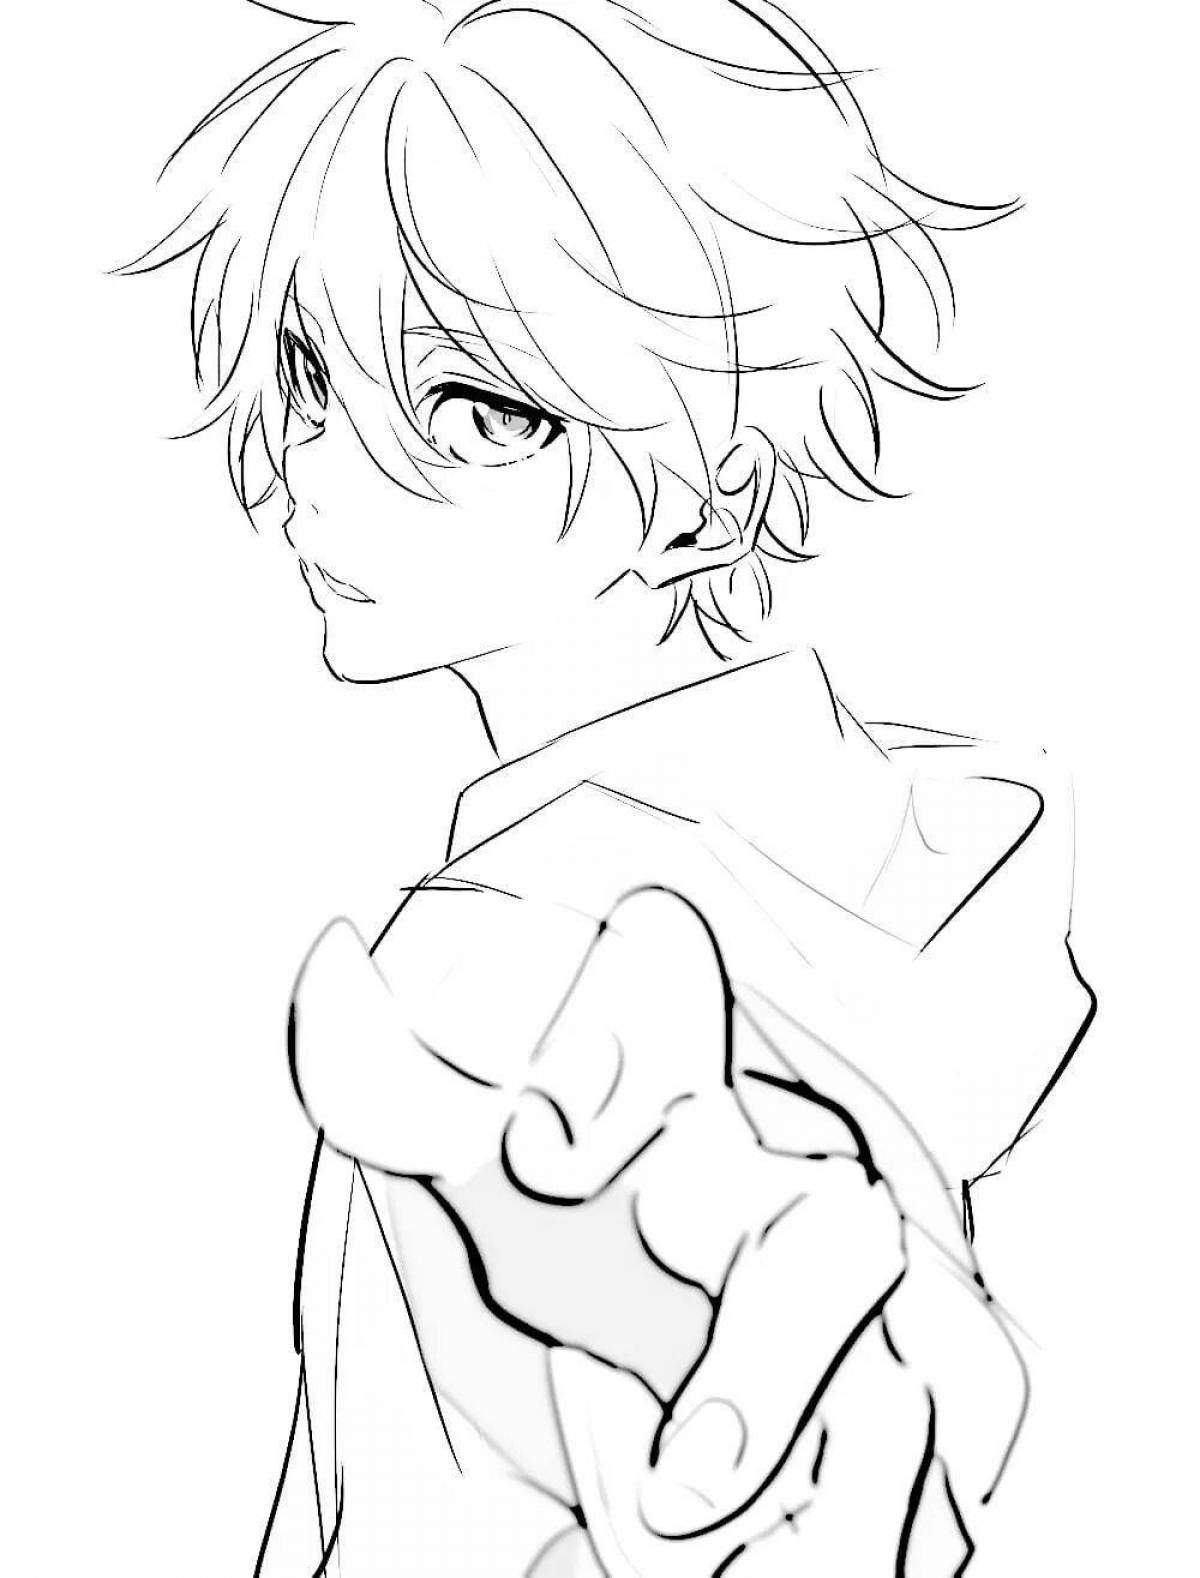 Radiant coloring page full length anime boy